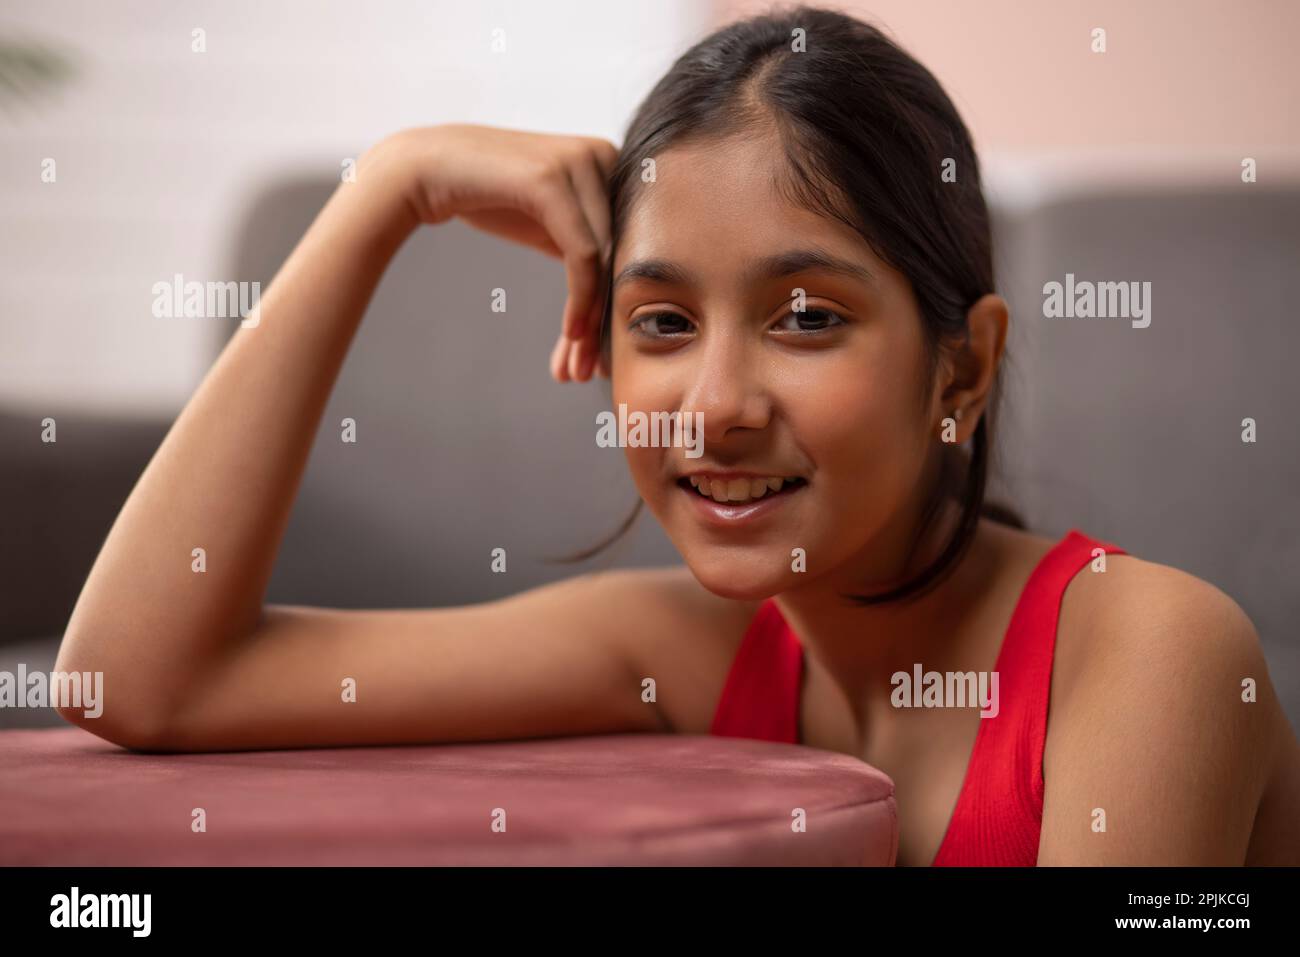 Close-up portrait of a cheerful girl looking at camera Stock Photo